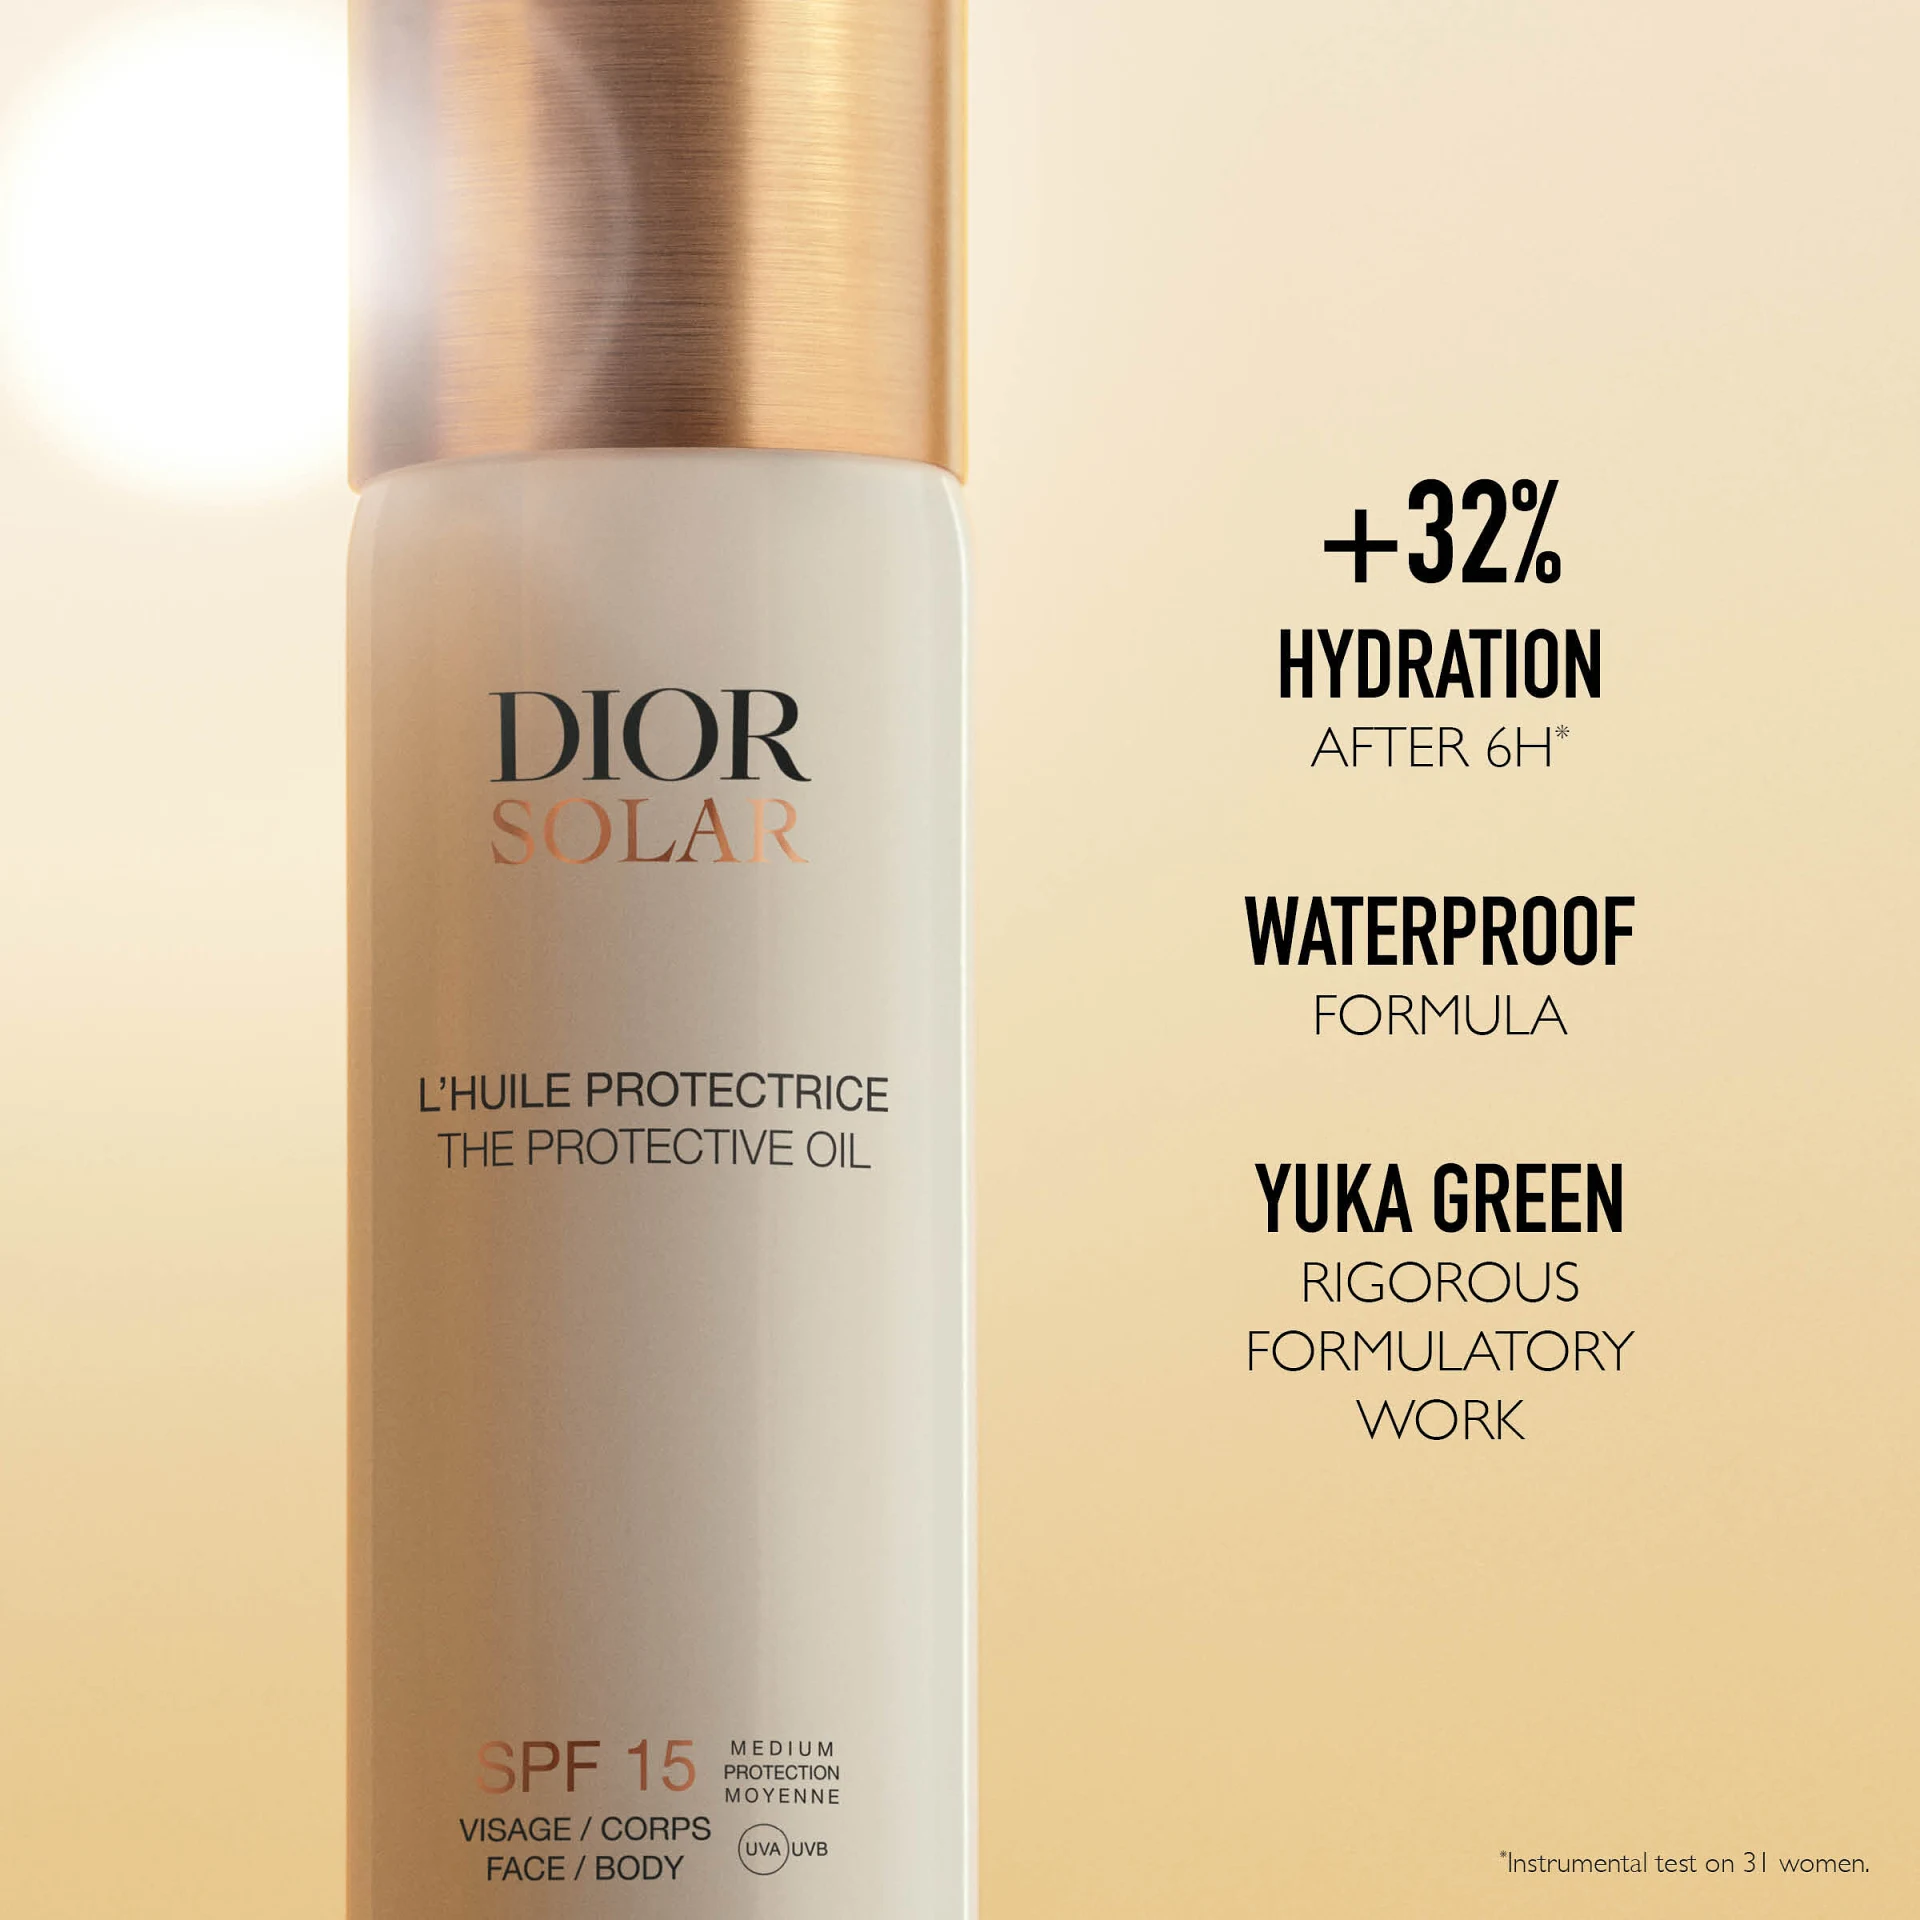 Dior Solar The Protective Face and Body Oil SPF 15